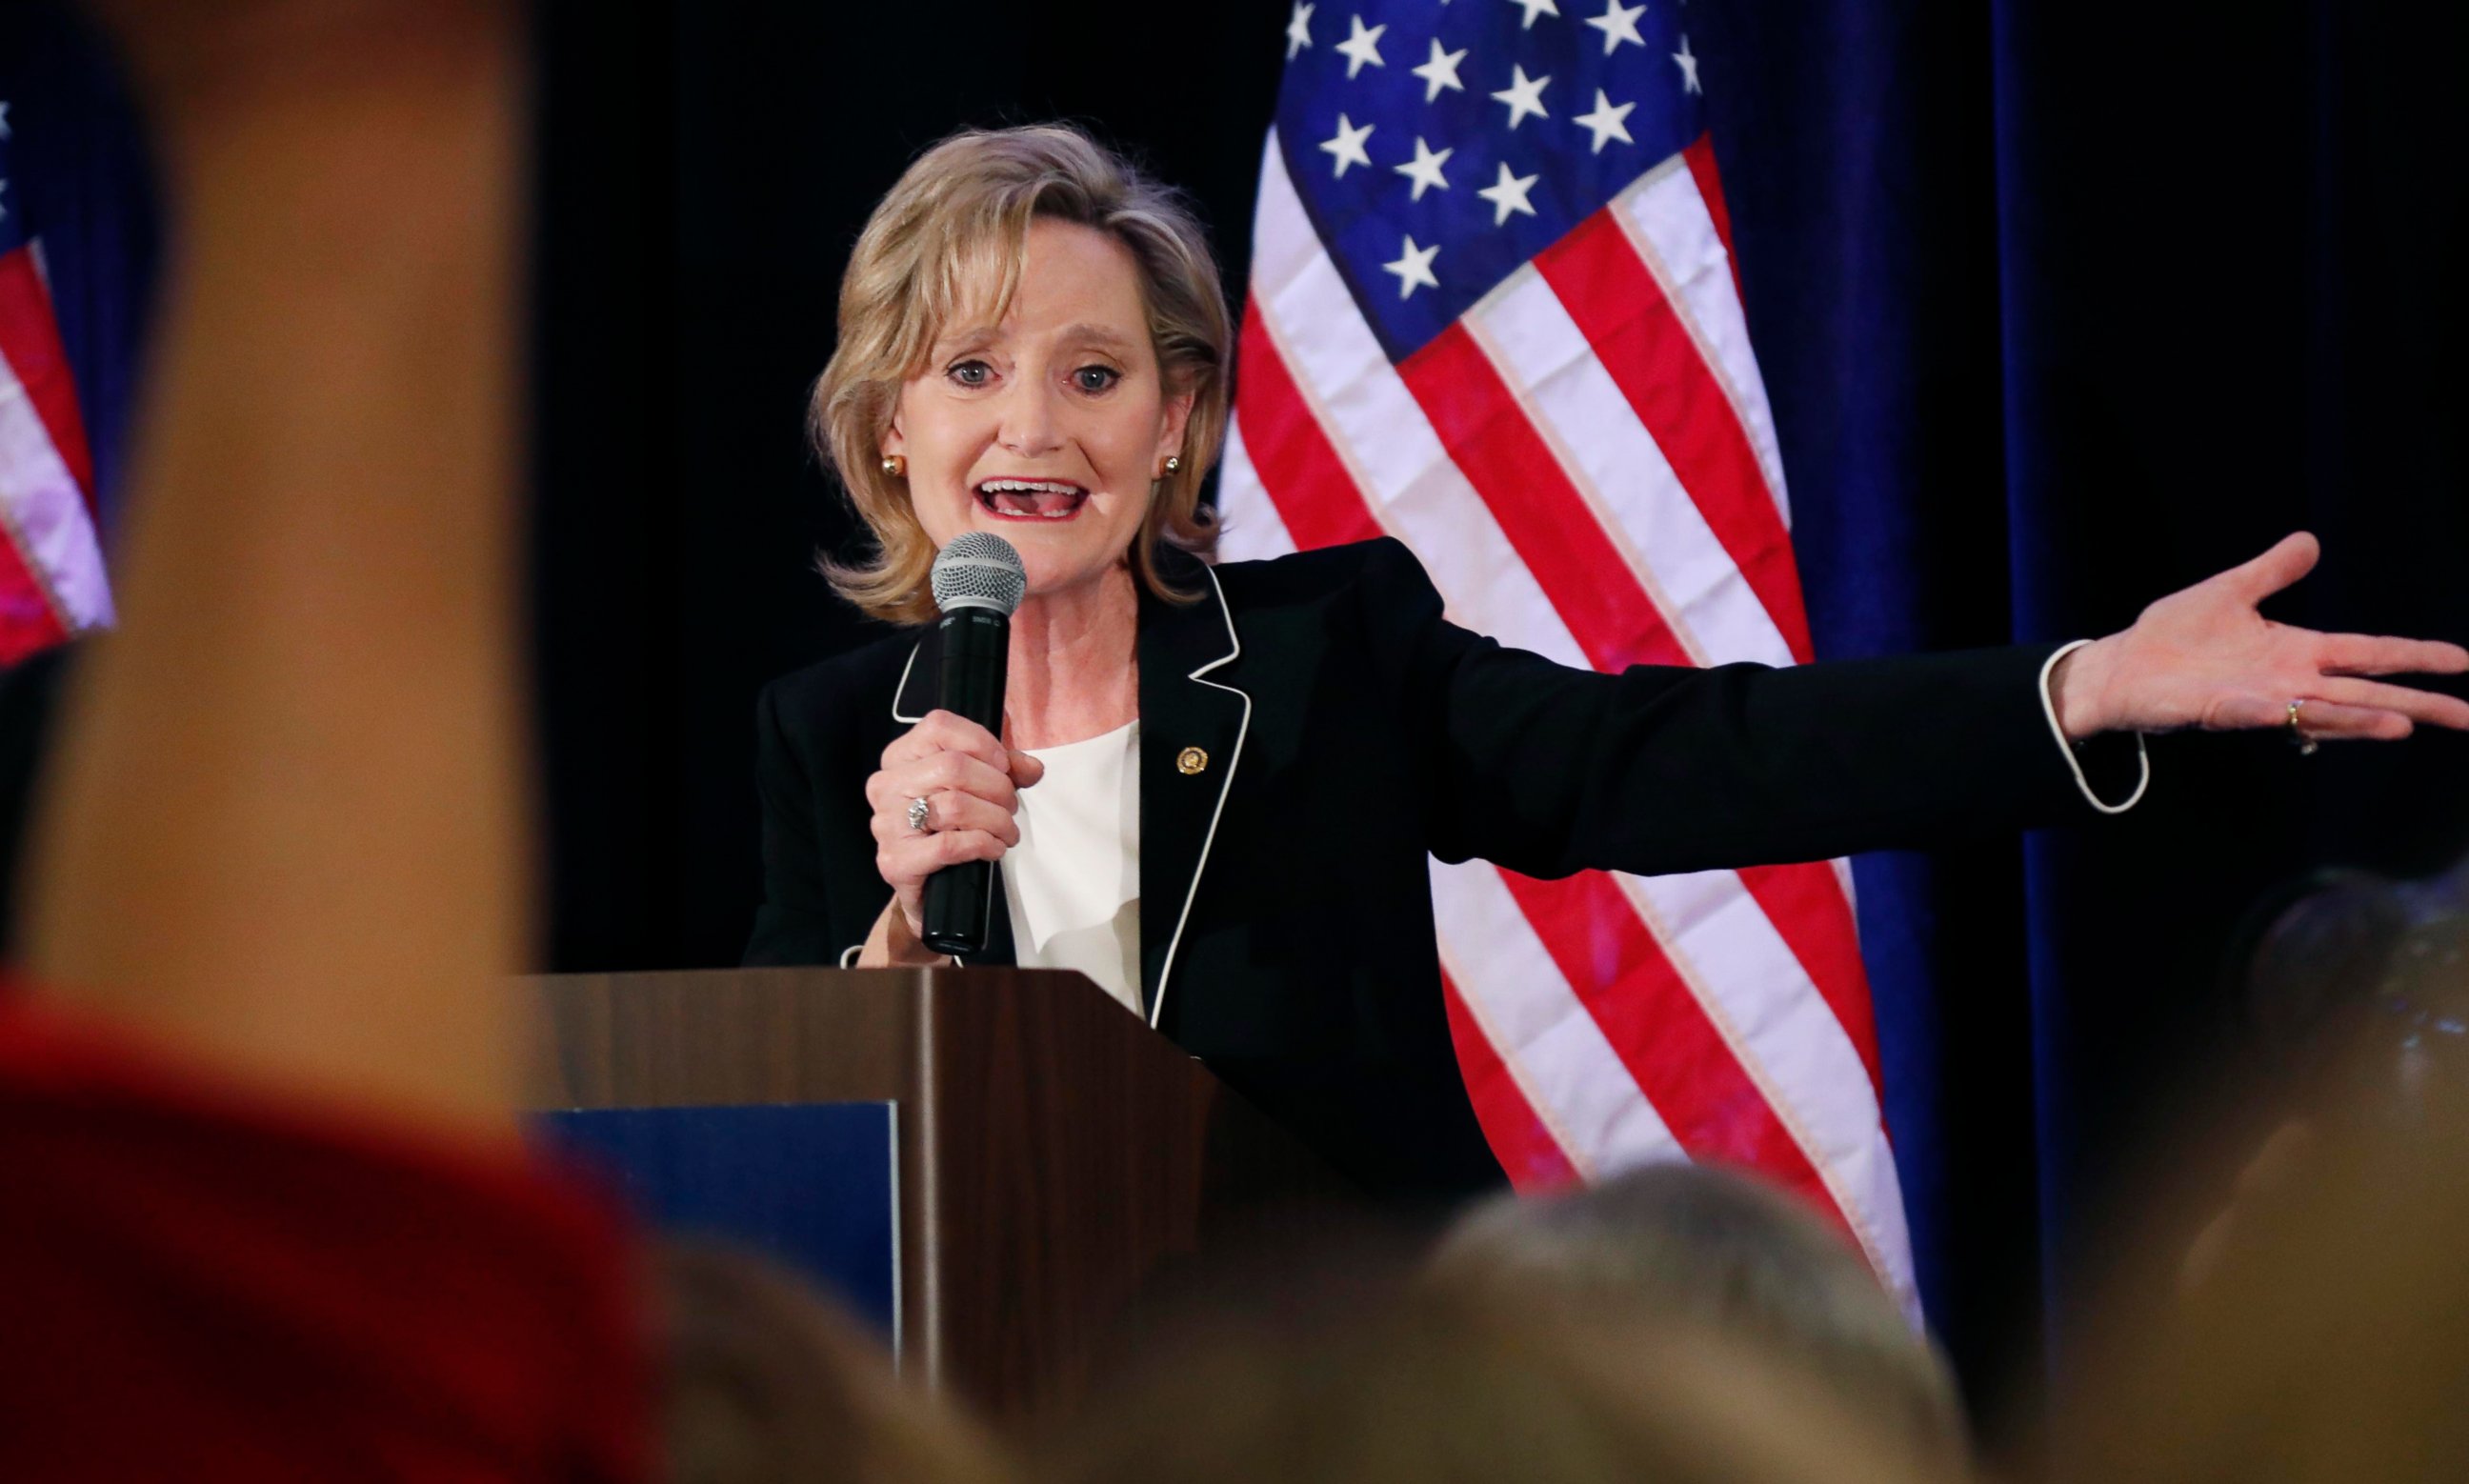 PHOTO: Republican U.S. Sen. Cindy Hyde-Smith calls on her family members to identify themselves as she celebrates her runoff win over Democrat Mike Espy in Jackson, Miss., Tuesday, Nov. 27, 2018.